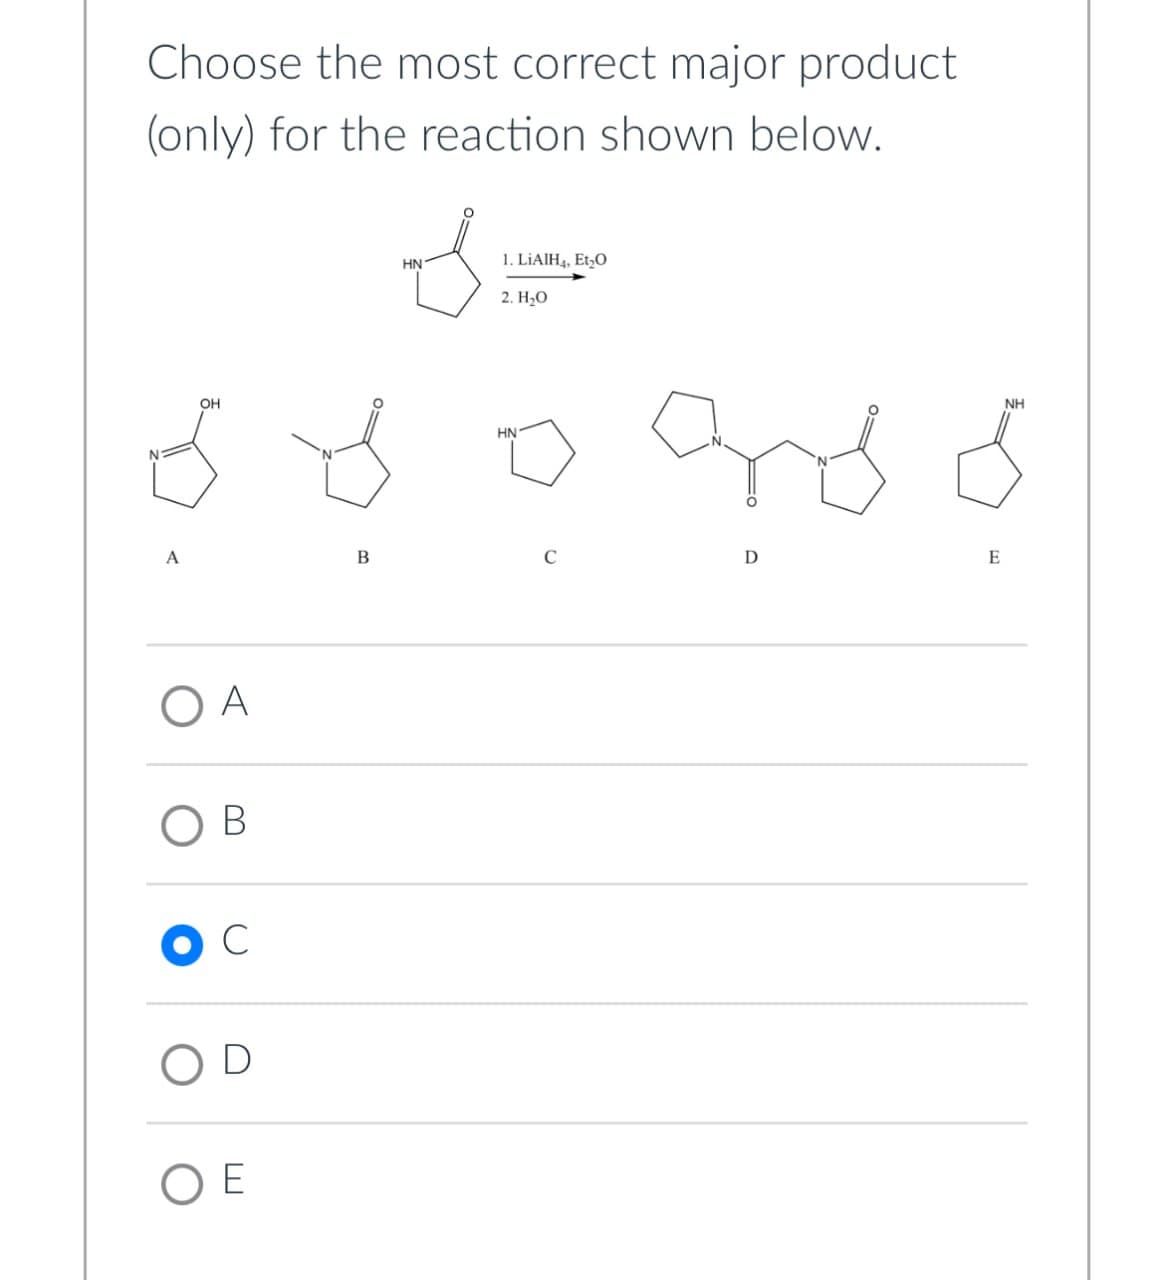 Choose the most correct major product
(only) for the reaction shown below.
OH
HN
1. LiAlH4, Et₂O
2. H₂O
HN
C
B
A
A
O B
C
D
OE
NH
and o
D
E